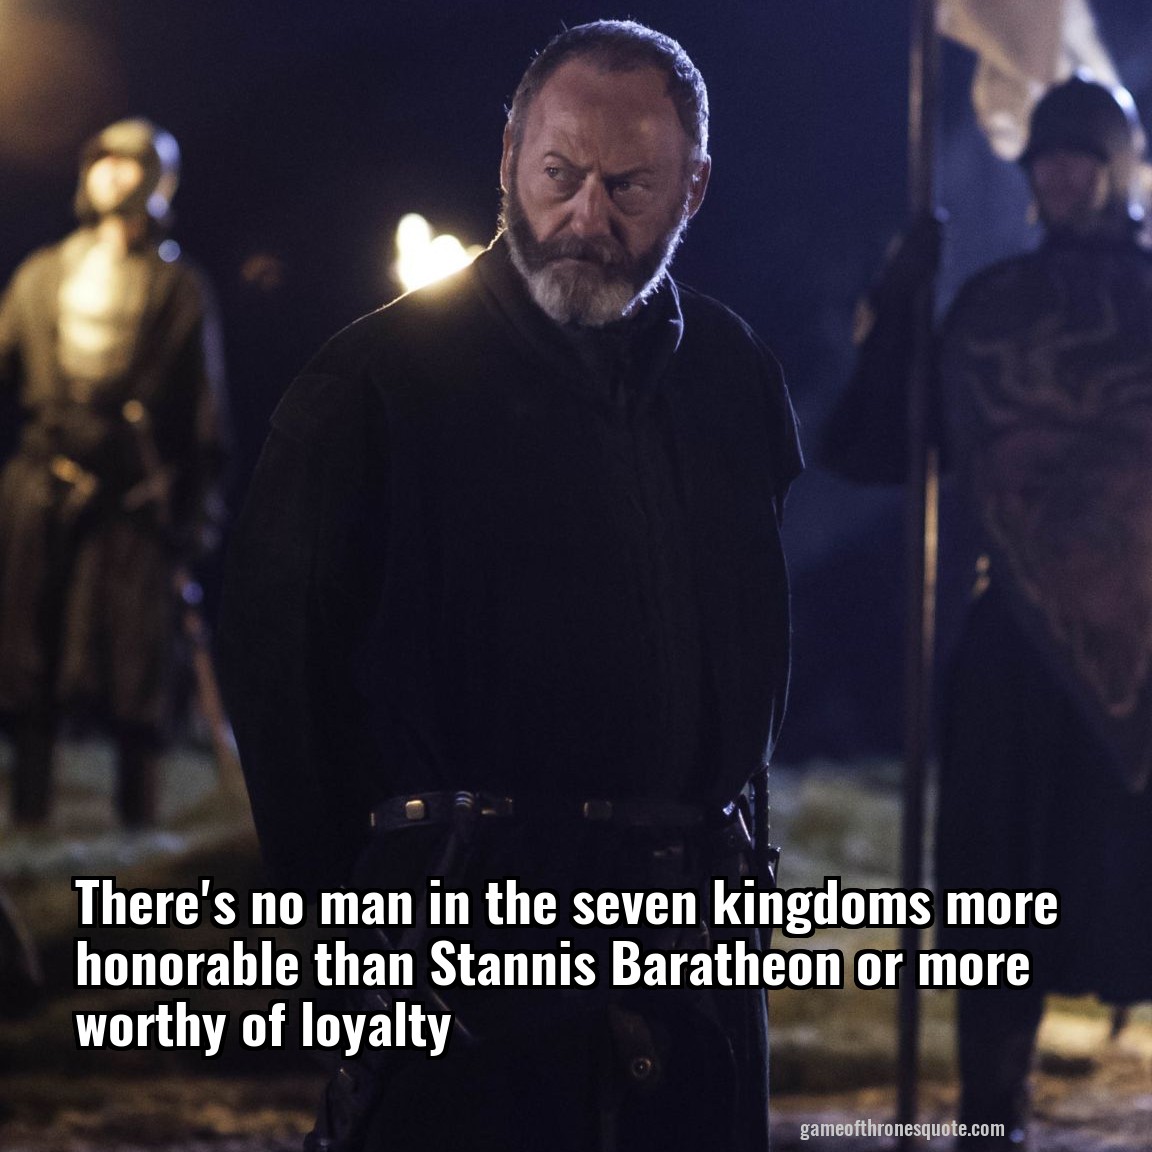 There's no man in the seven kingdoms more honorable than Stannis Baratheon or more worthy of loyalty